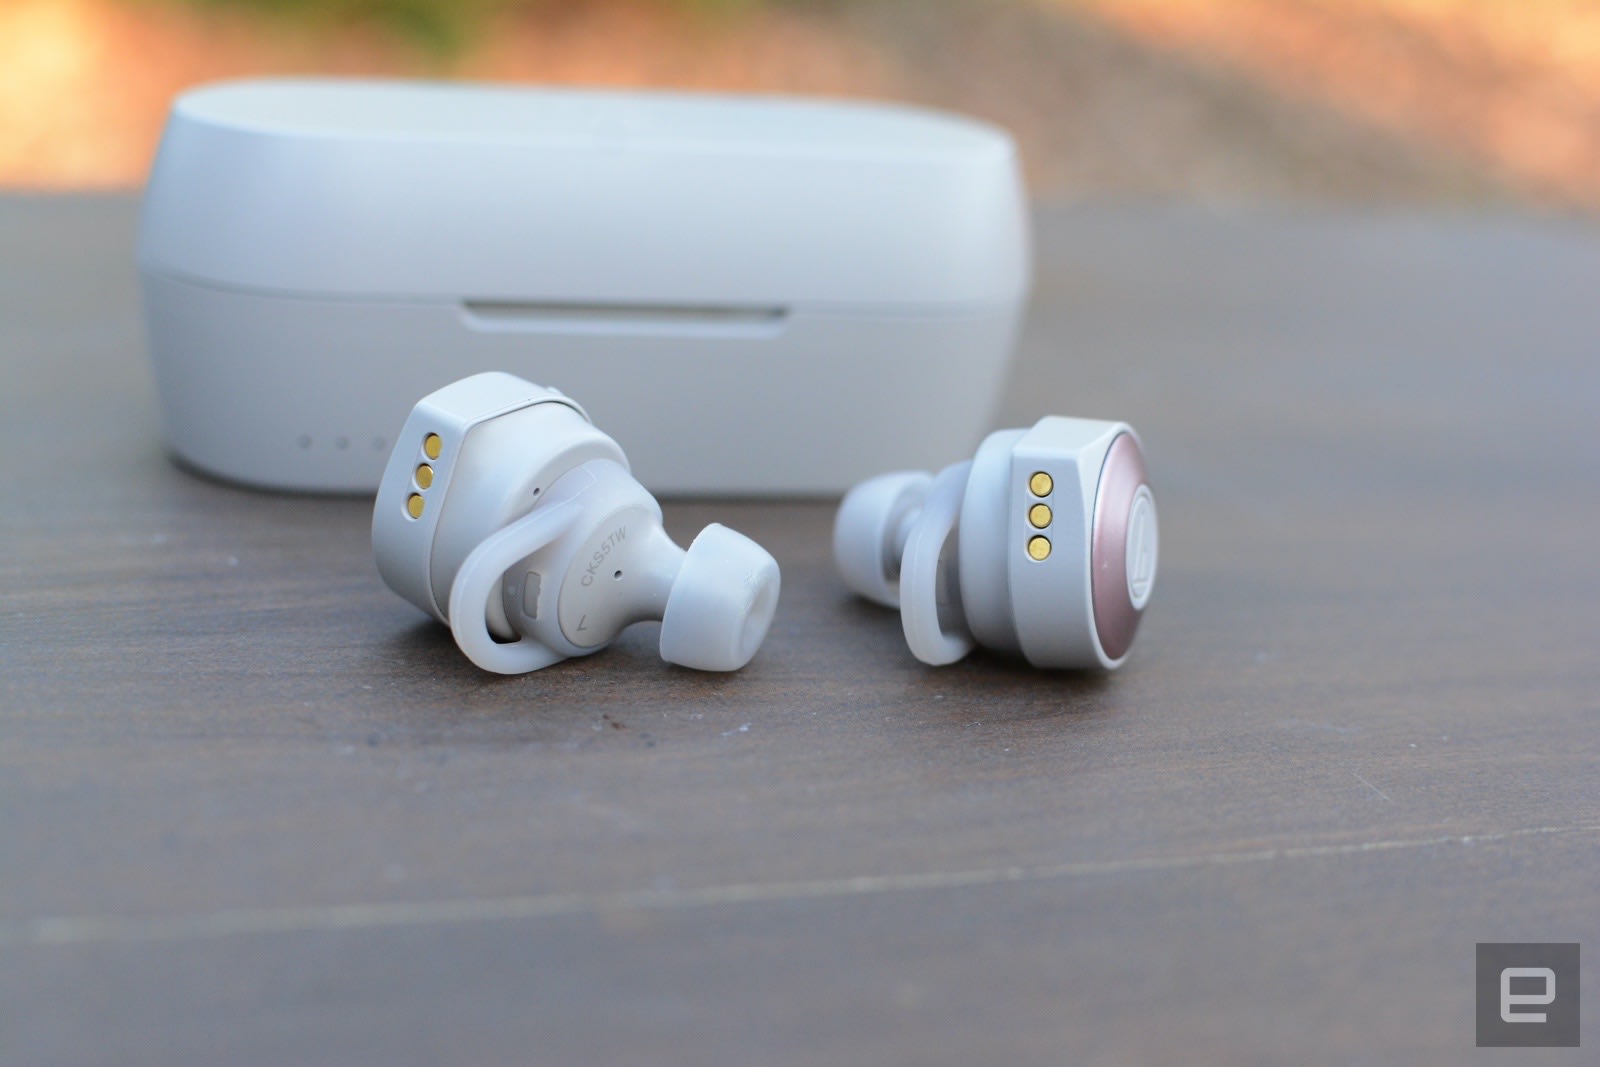 Audio-Technica ATH-CKS5TW review: Long battery life at a decent 